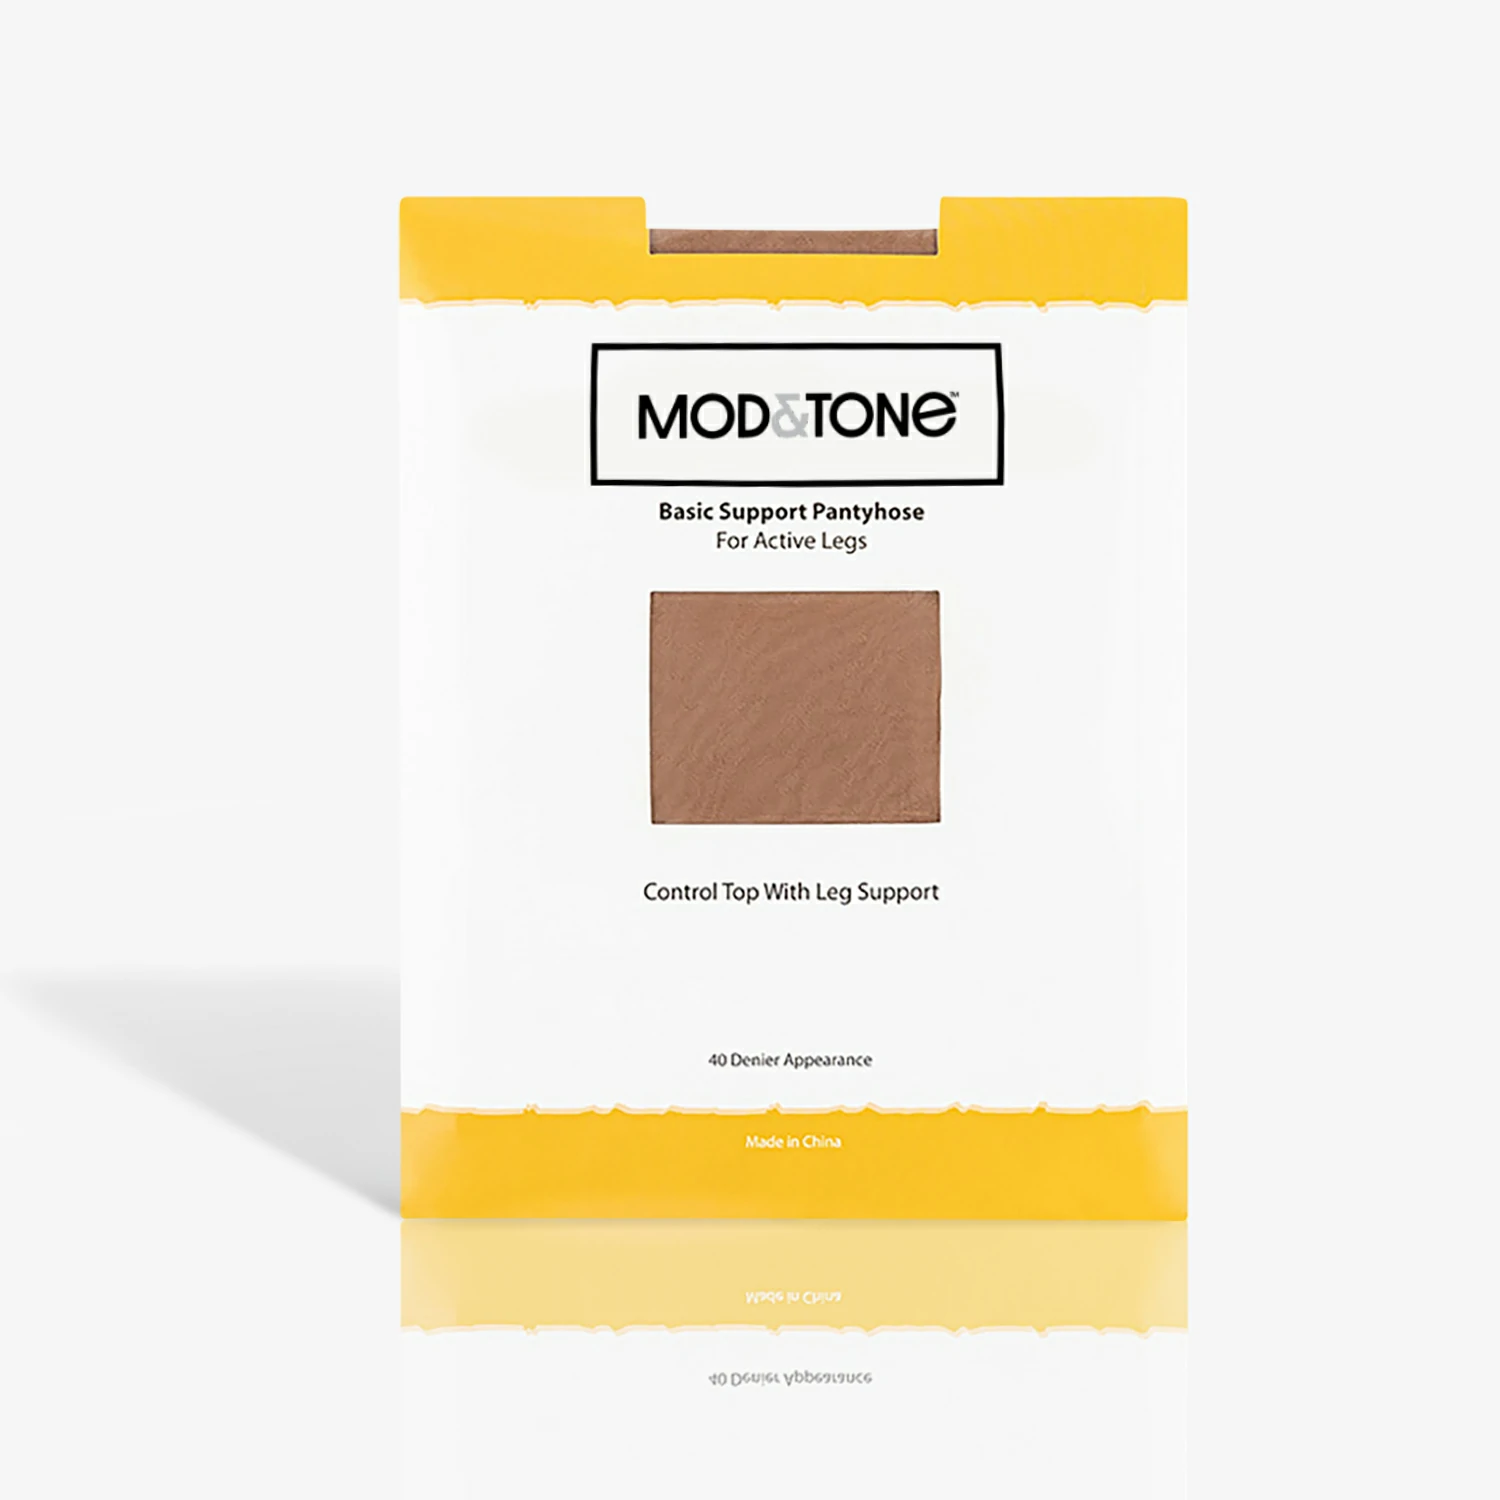 Mod&tone 6 pack Basic Support Pantyhose 40 denier bronzing spf 15 with Basic Support.